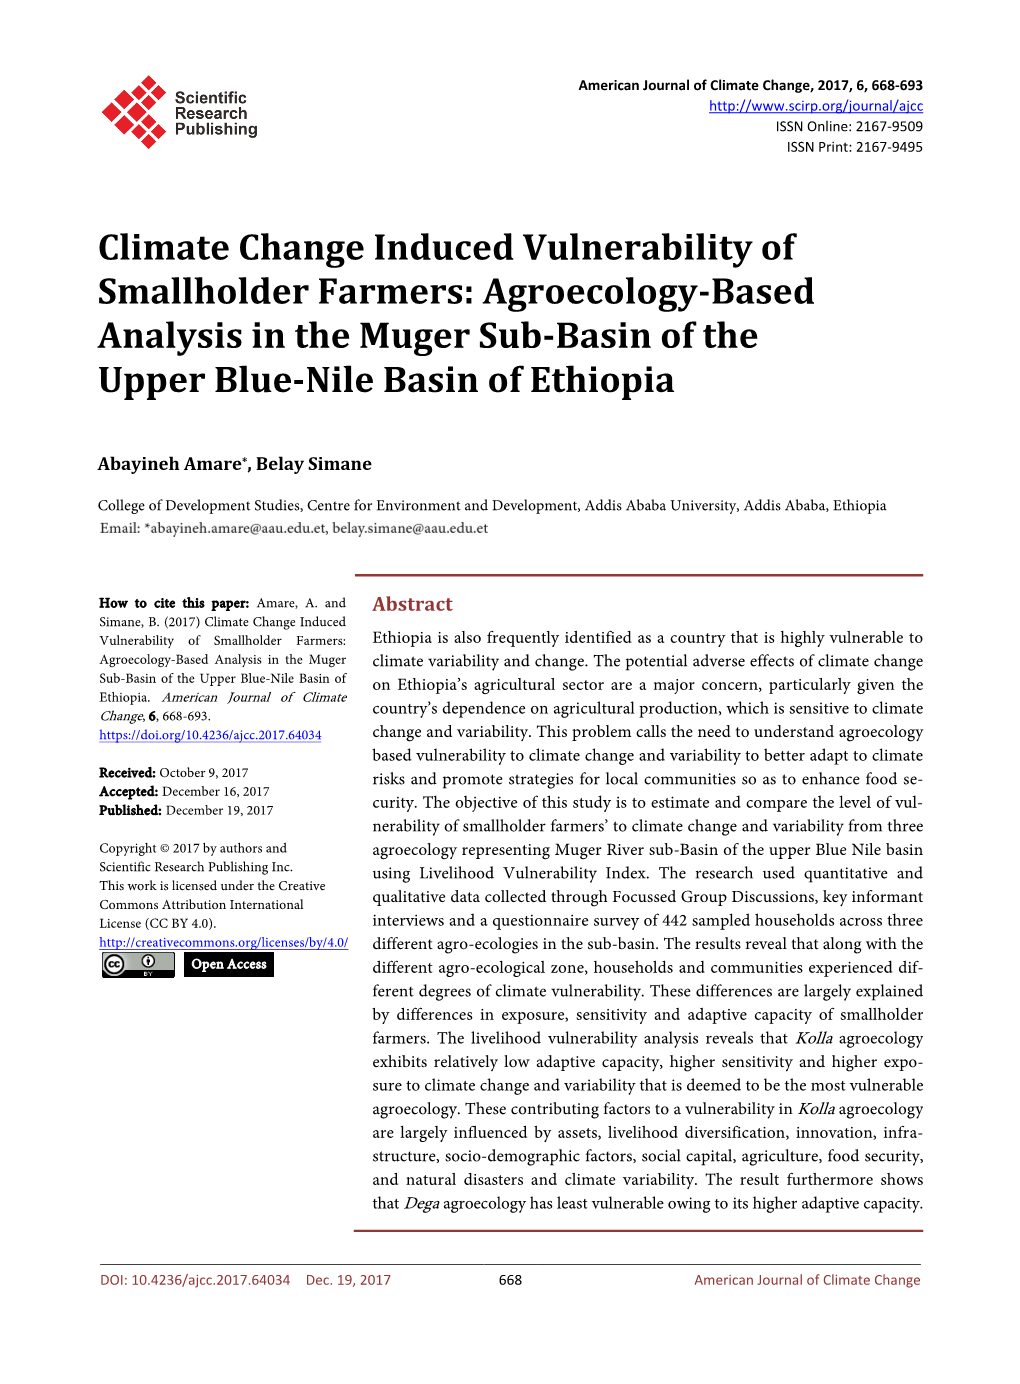 Climate Change Induced Vulnerability of Smallholder Farmers: Agroecology-Based Analysis in the Muger Sub-Basin of the Upper Blue-Nile Basin of Ethiopia